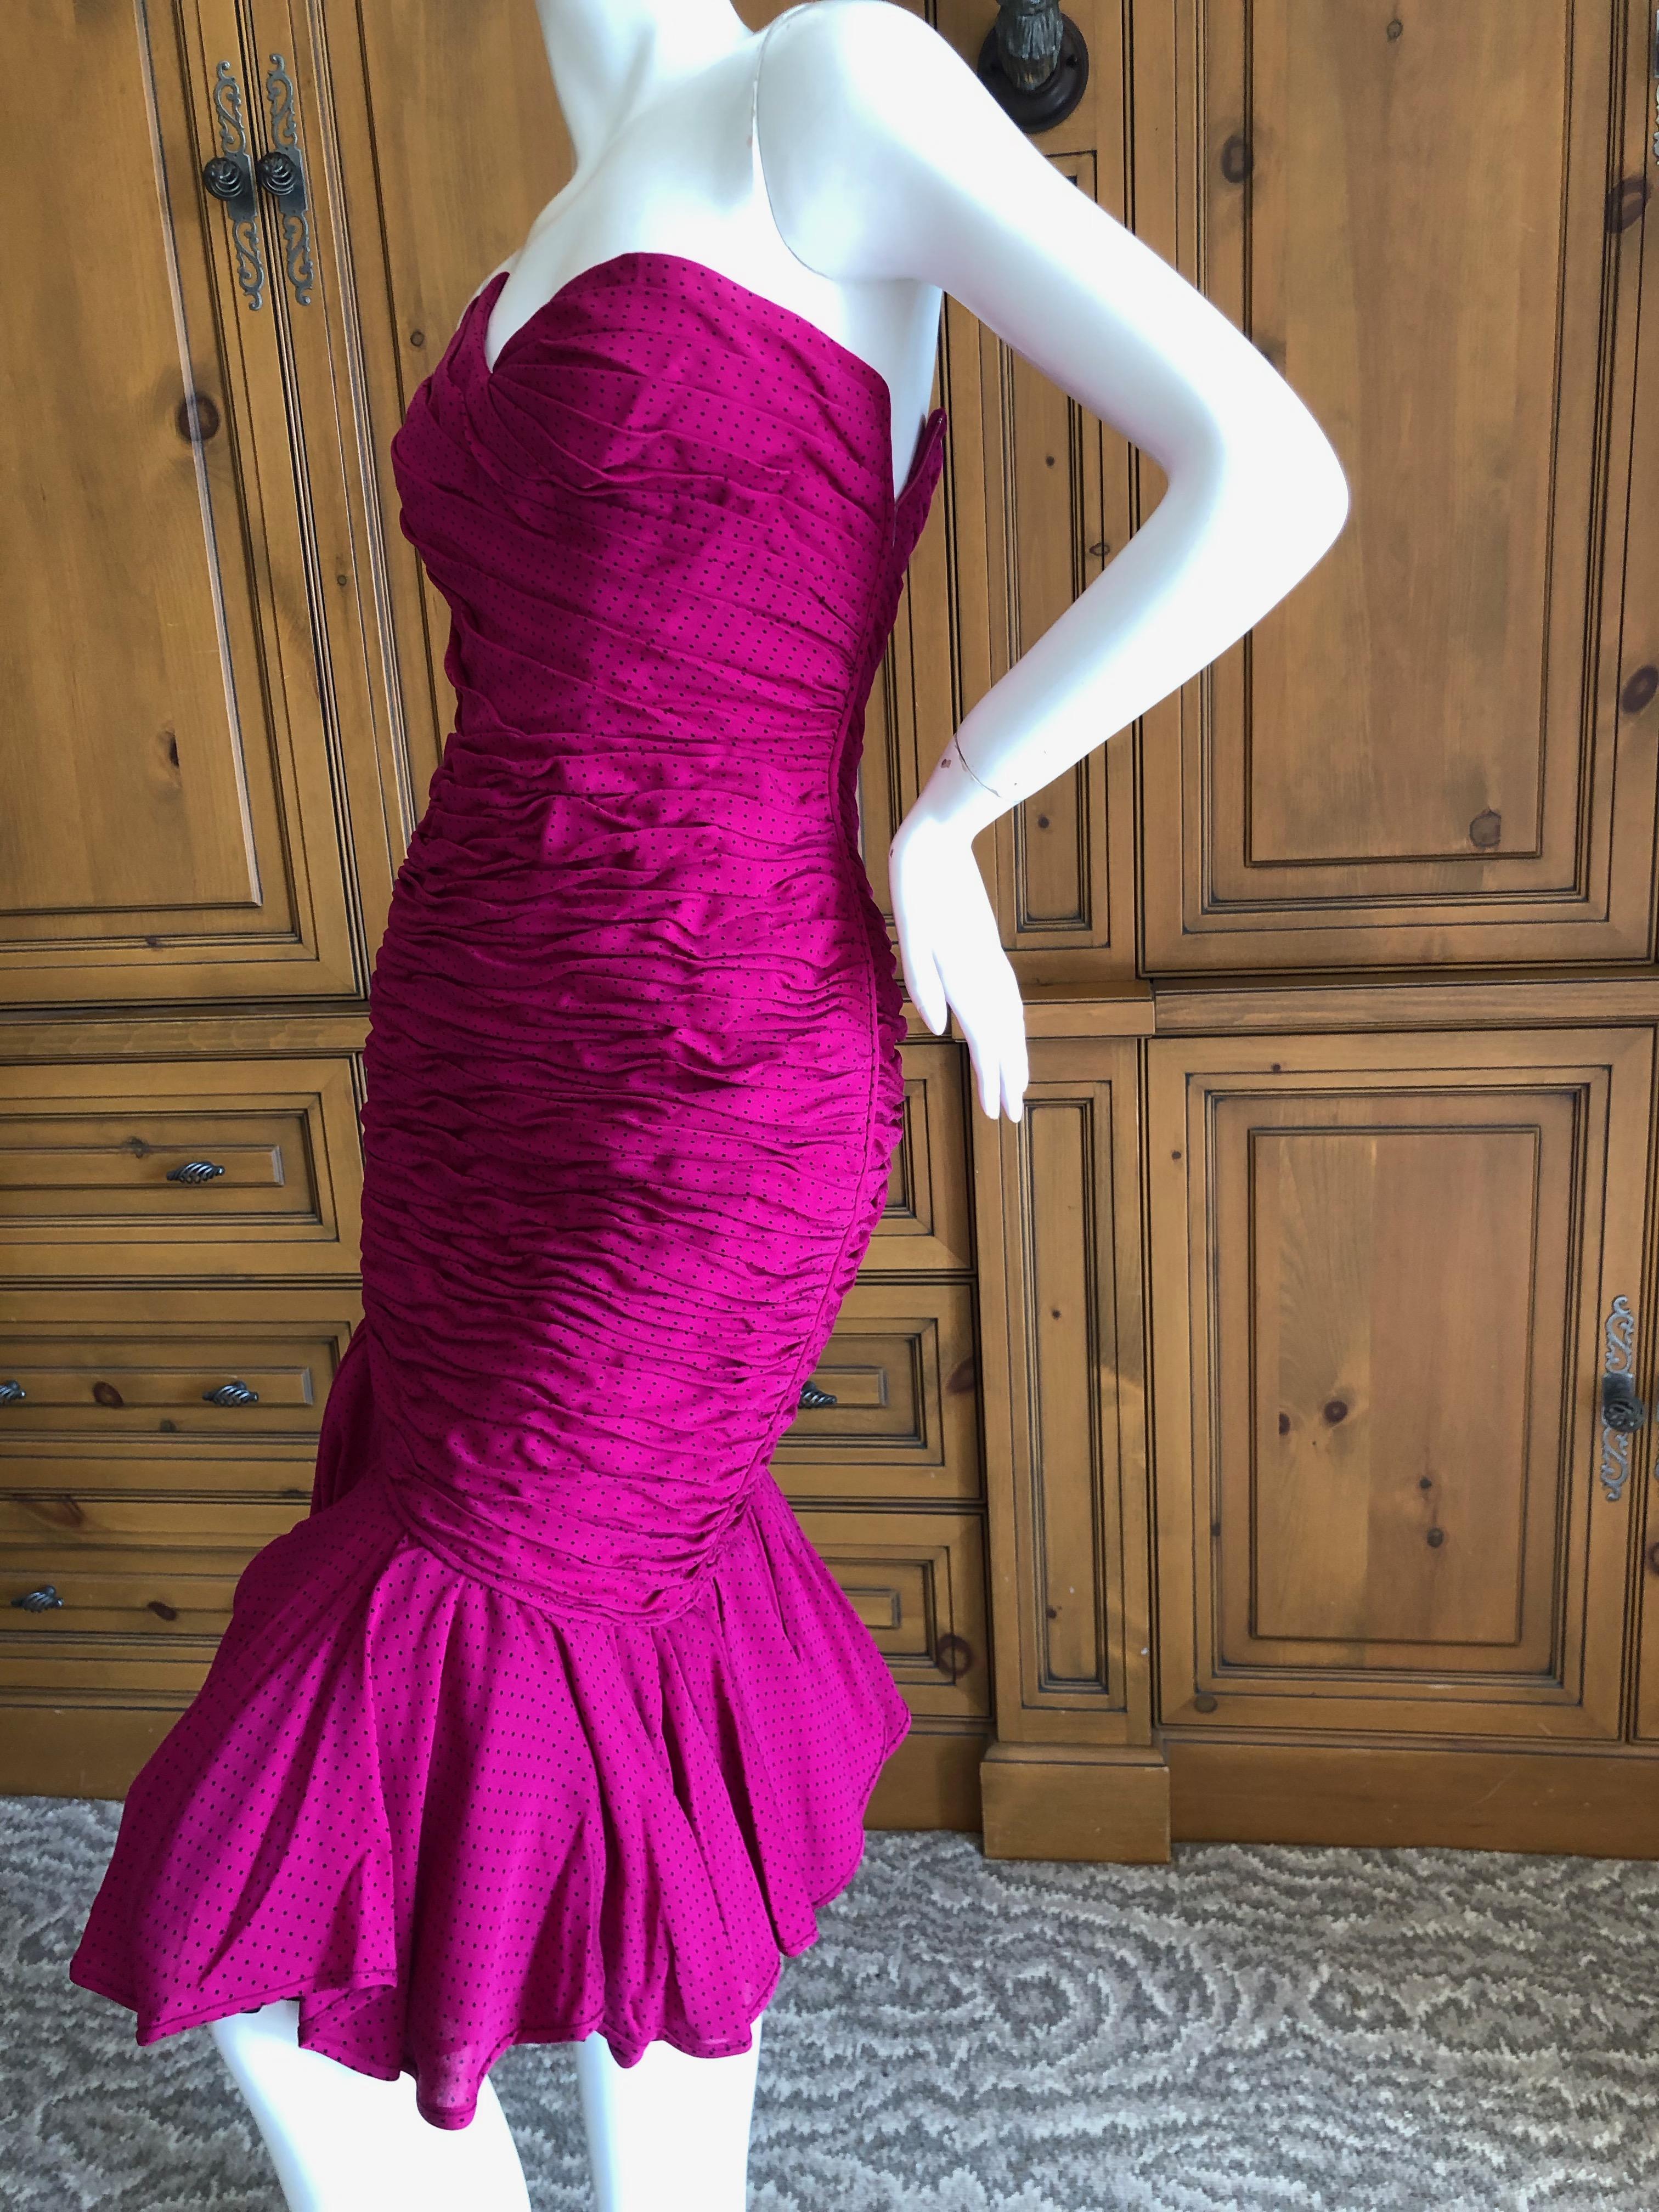 Emanuel Ungaro Parallel Fall 1984 Shirred Strapless Evening Dress w Lace Hem For Sale 1